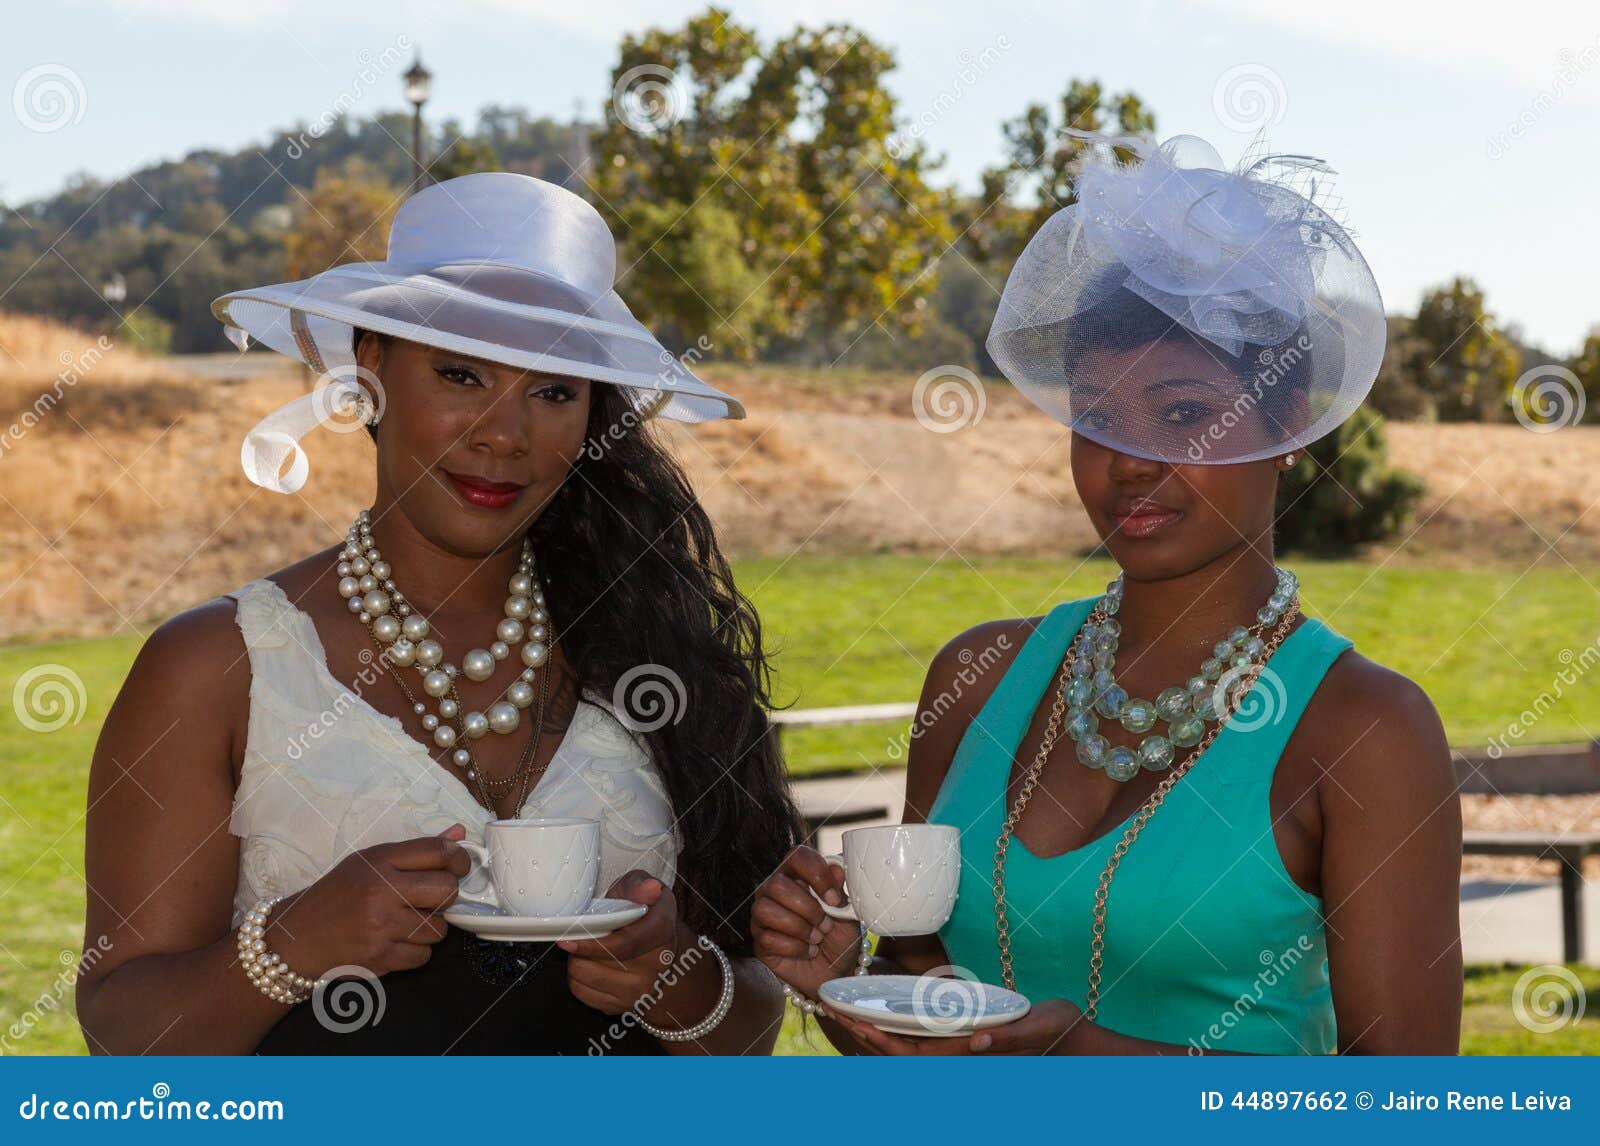 Ladies at a tea part stock photo. Image of southern, models - 44897662